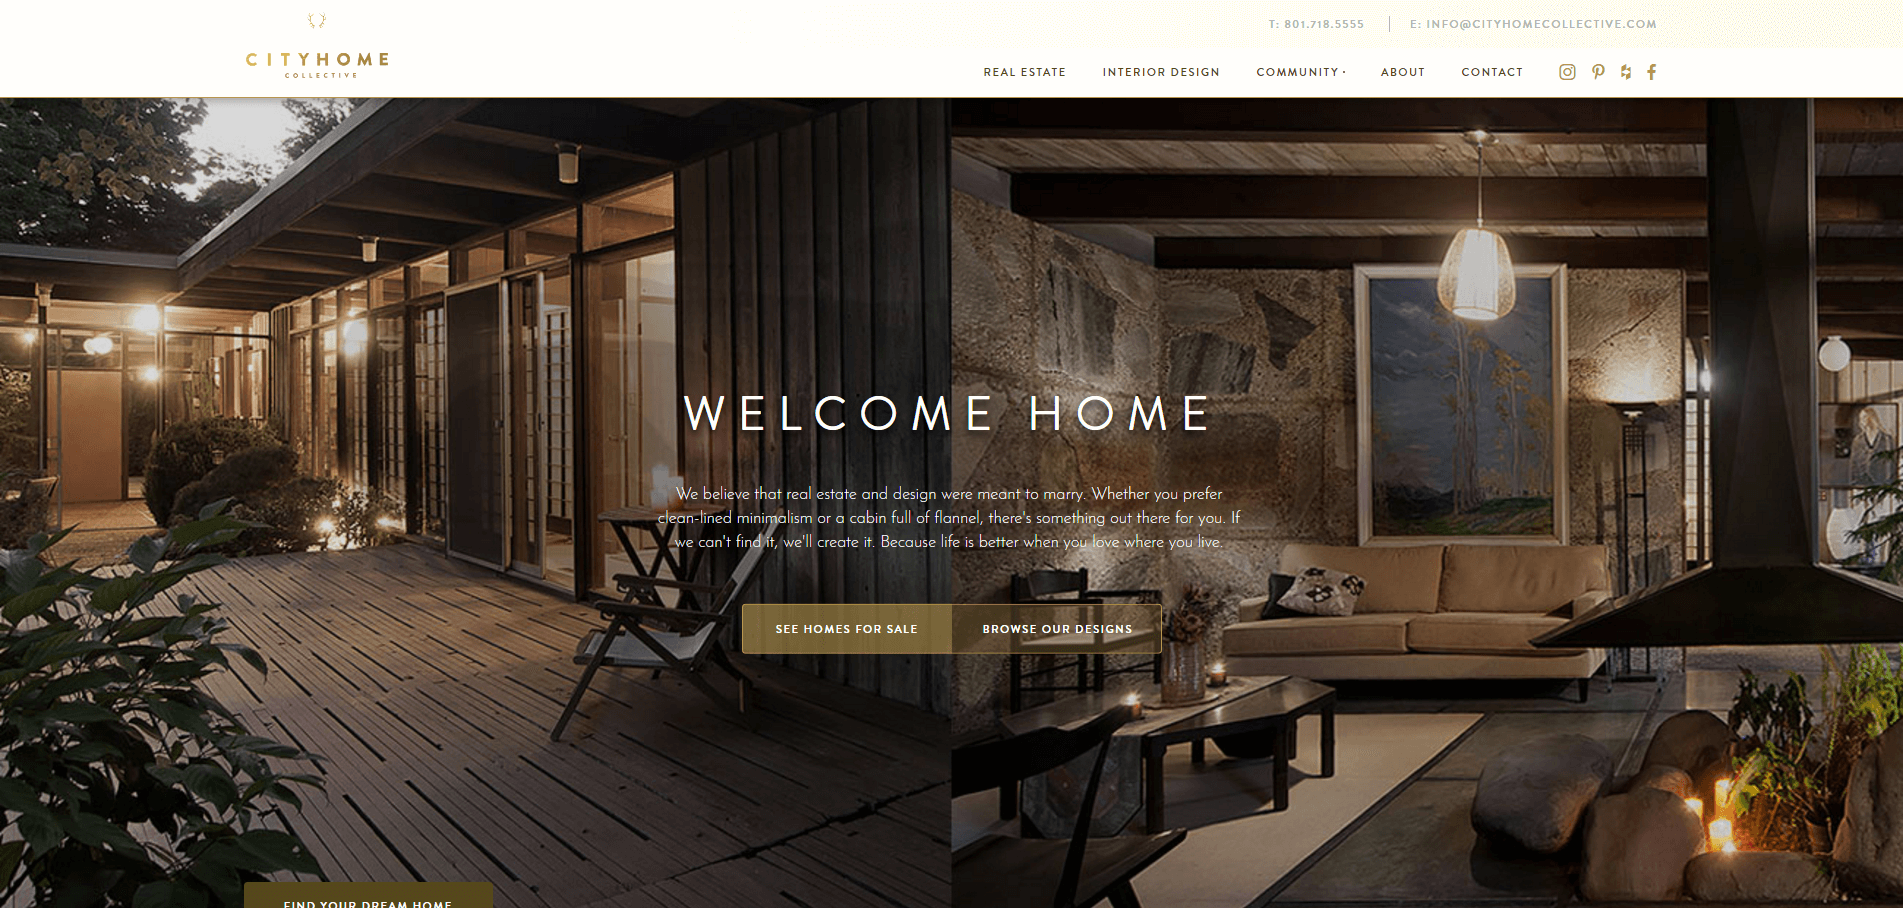  Incredible!  We listed 101 of the best real estate websites.  Here's cityhomecollective.com. 